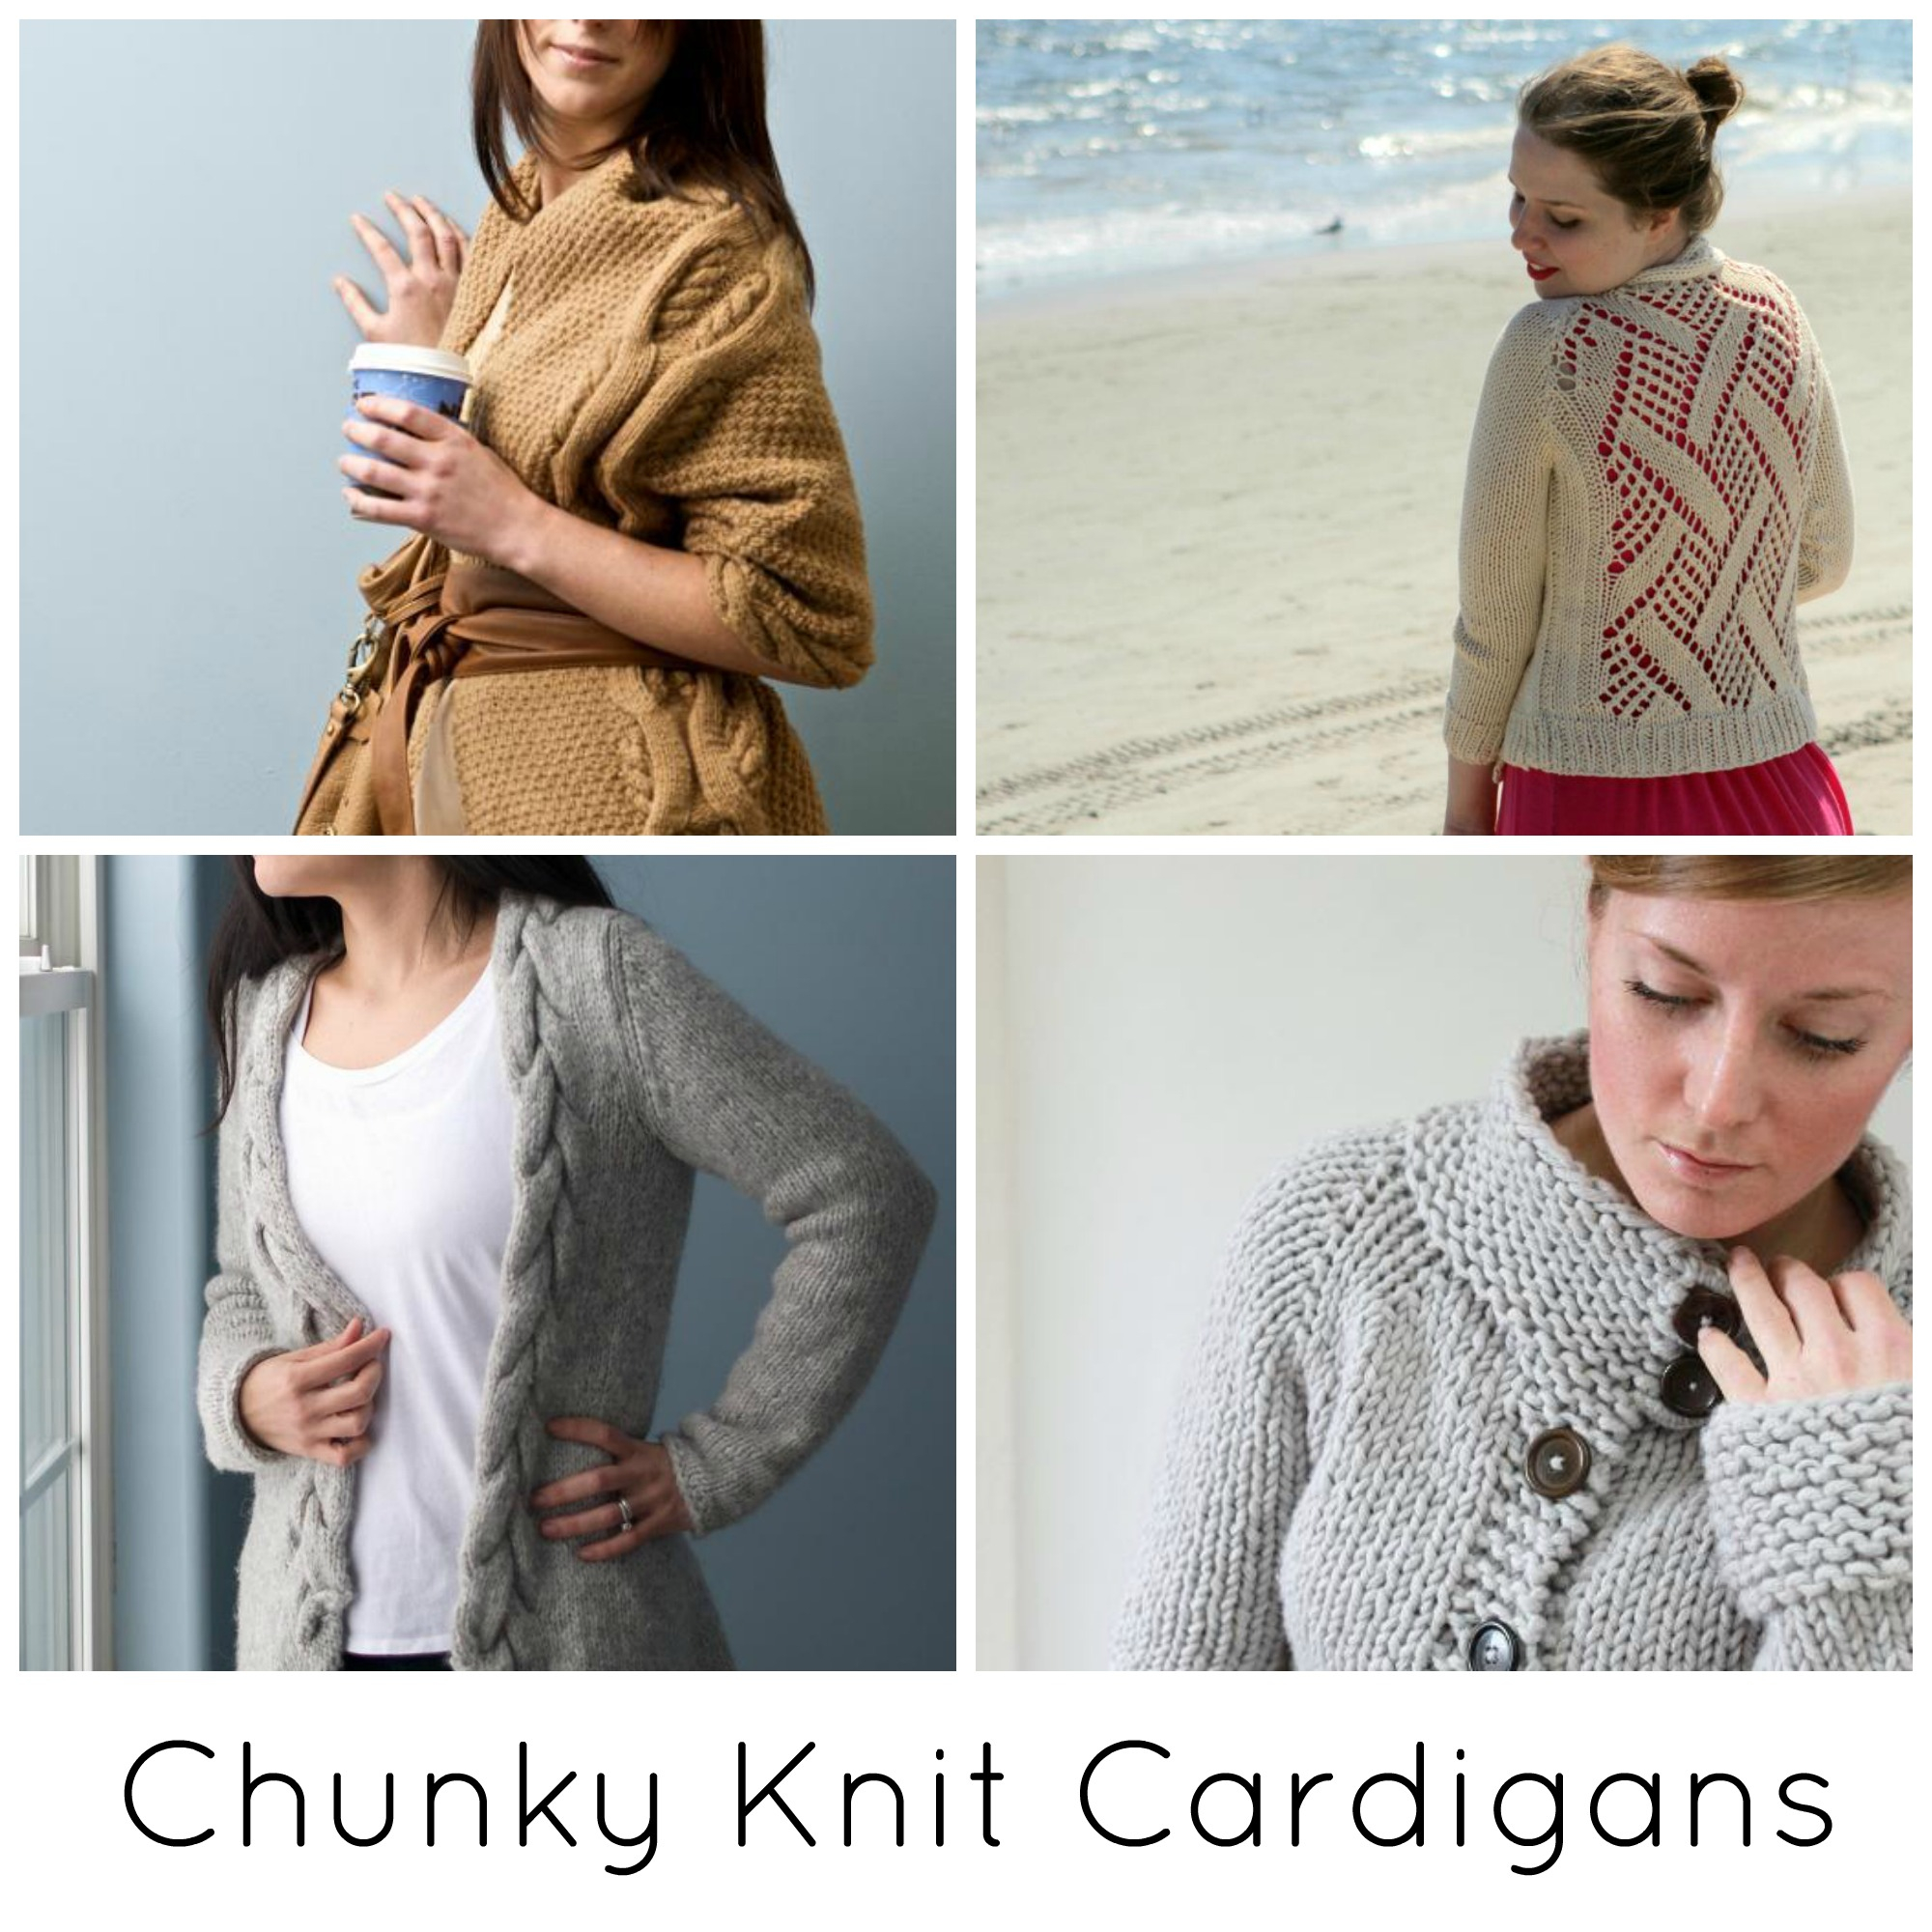 Free Knitting Patterns For Super Chunky Yarn The Coziest Chunky Knit Cardigan Patterns Ever